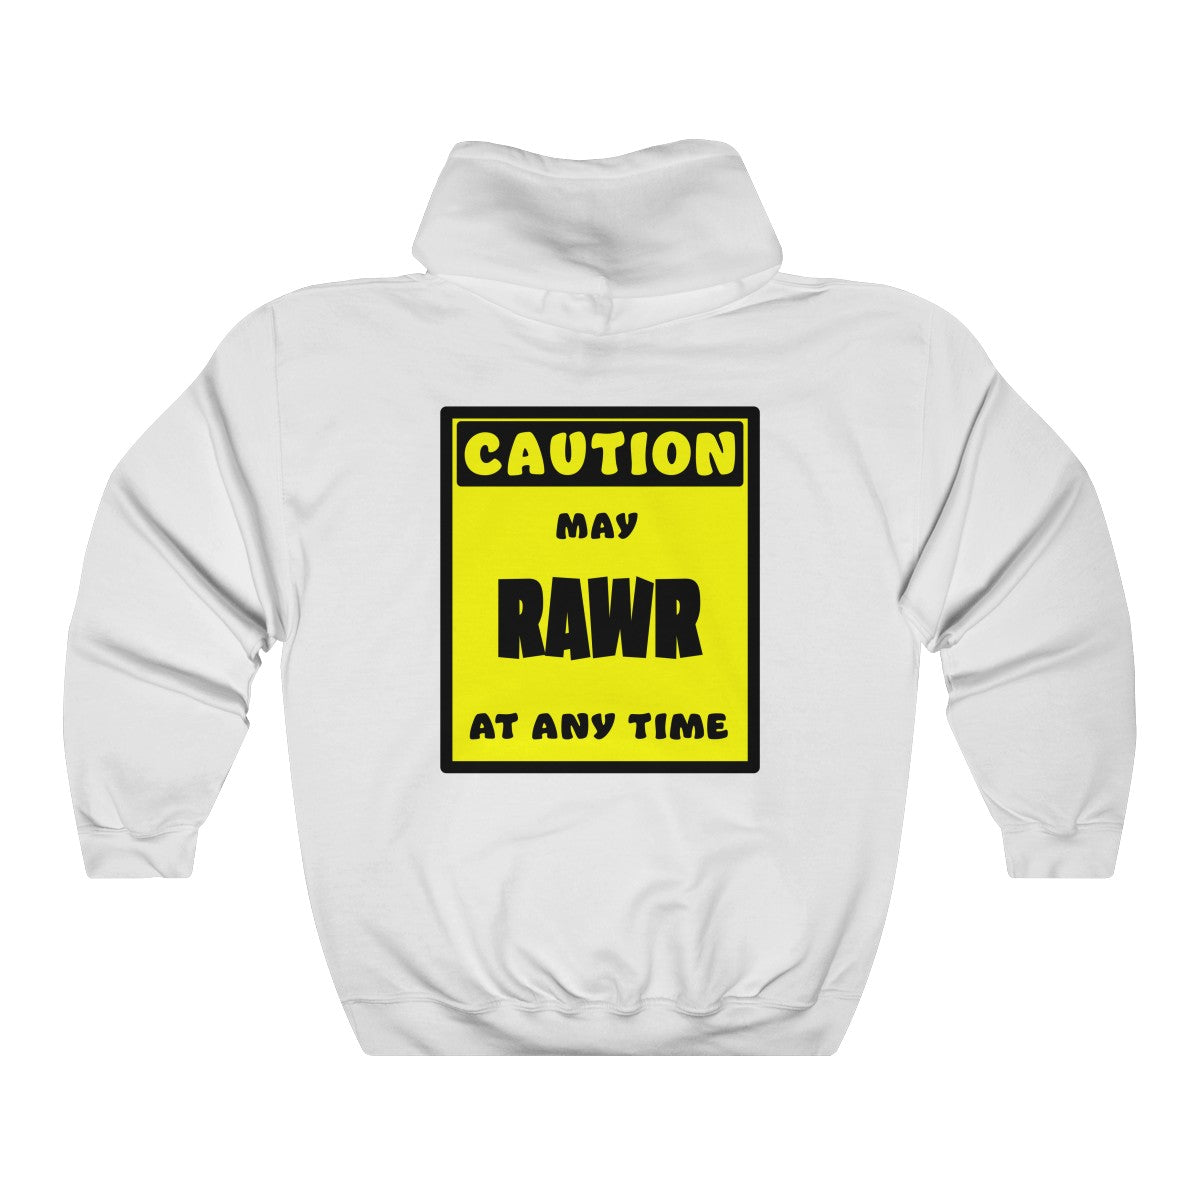 CAUTION! May RAWR at any time! - Hoodie Hoodie AFLT-Whootorca White S 